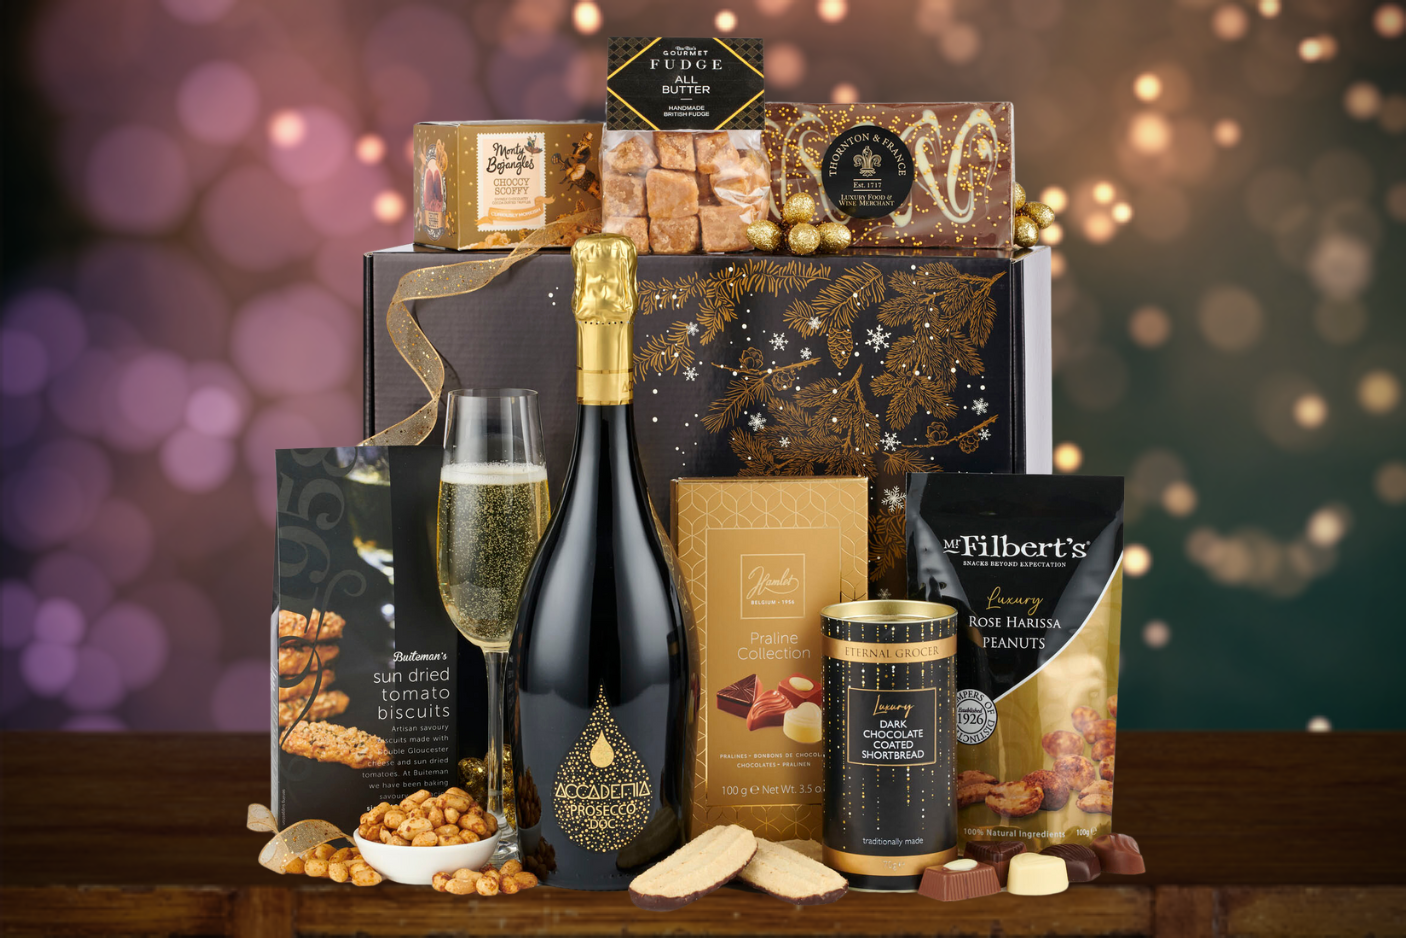 Featured Hampers